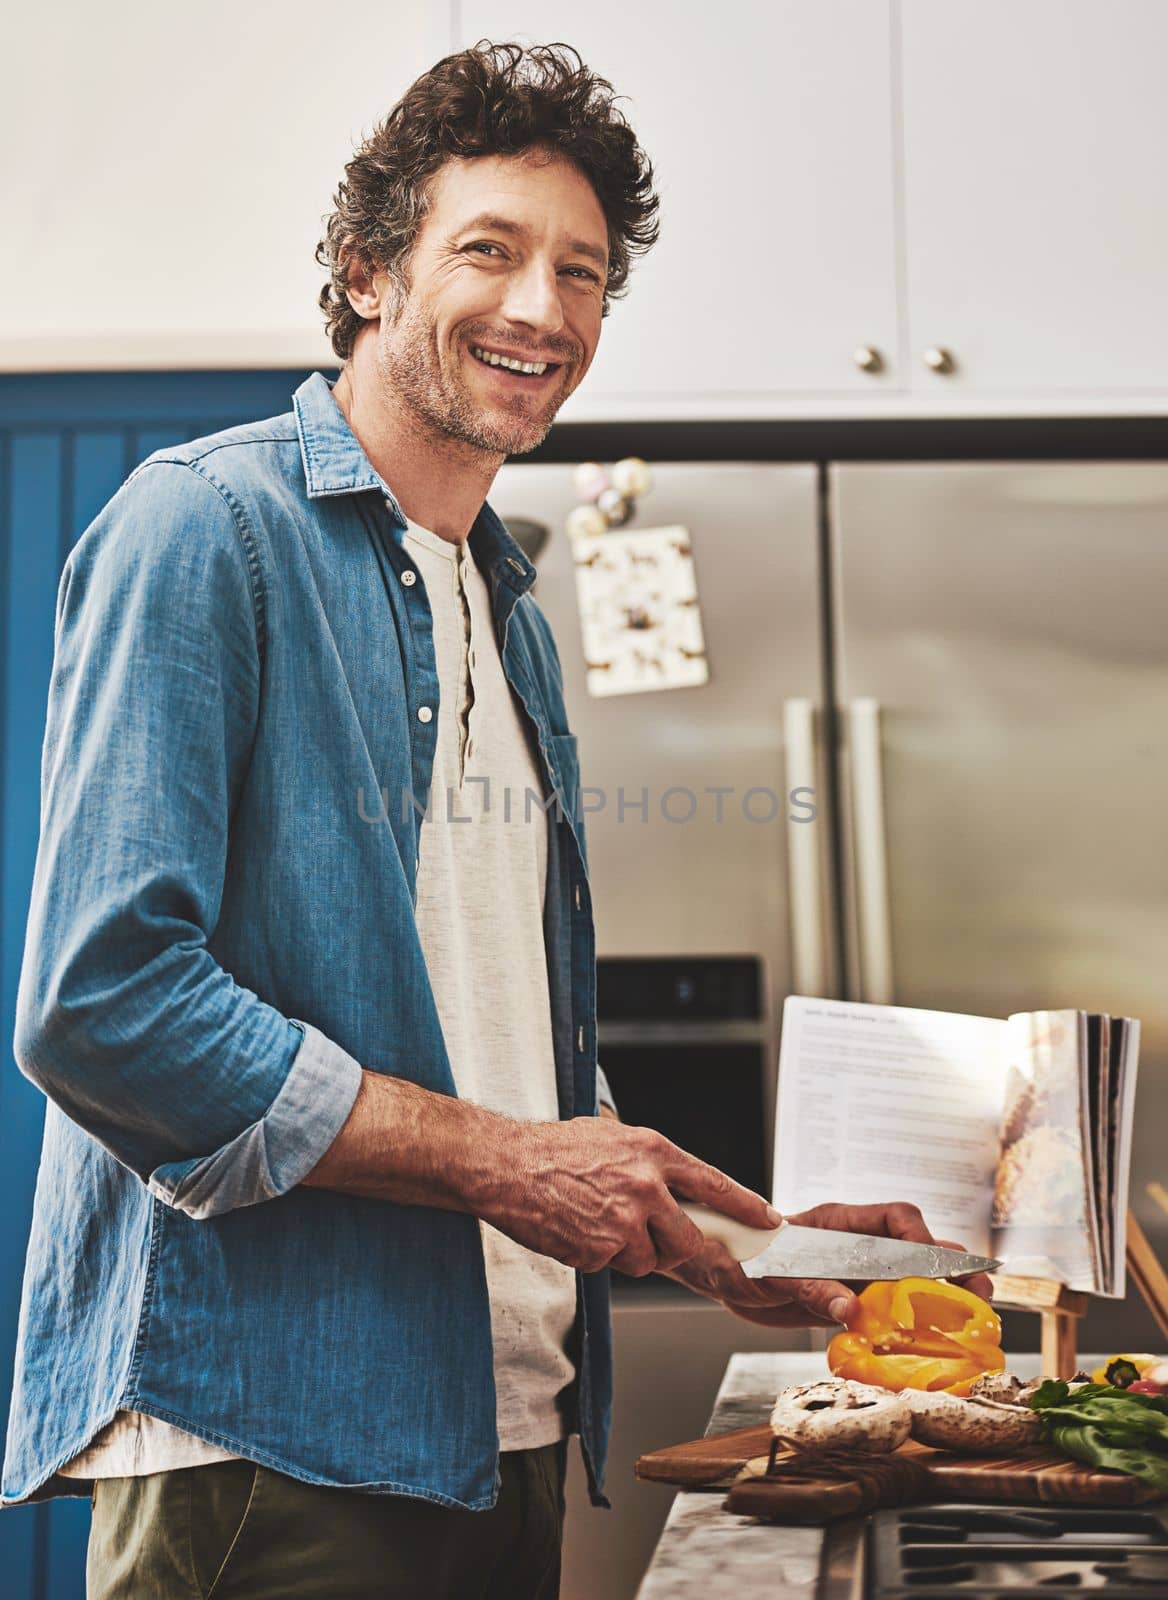 When you eat better, you feel better. Portrait of a happy bachelor chopping vegetables in his kitchen. by YuriArcurs